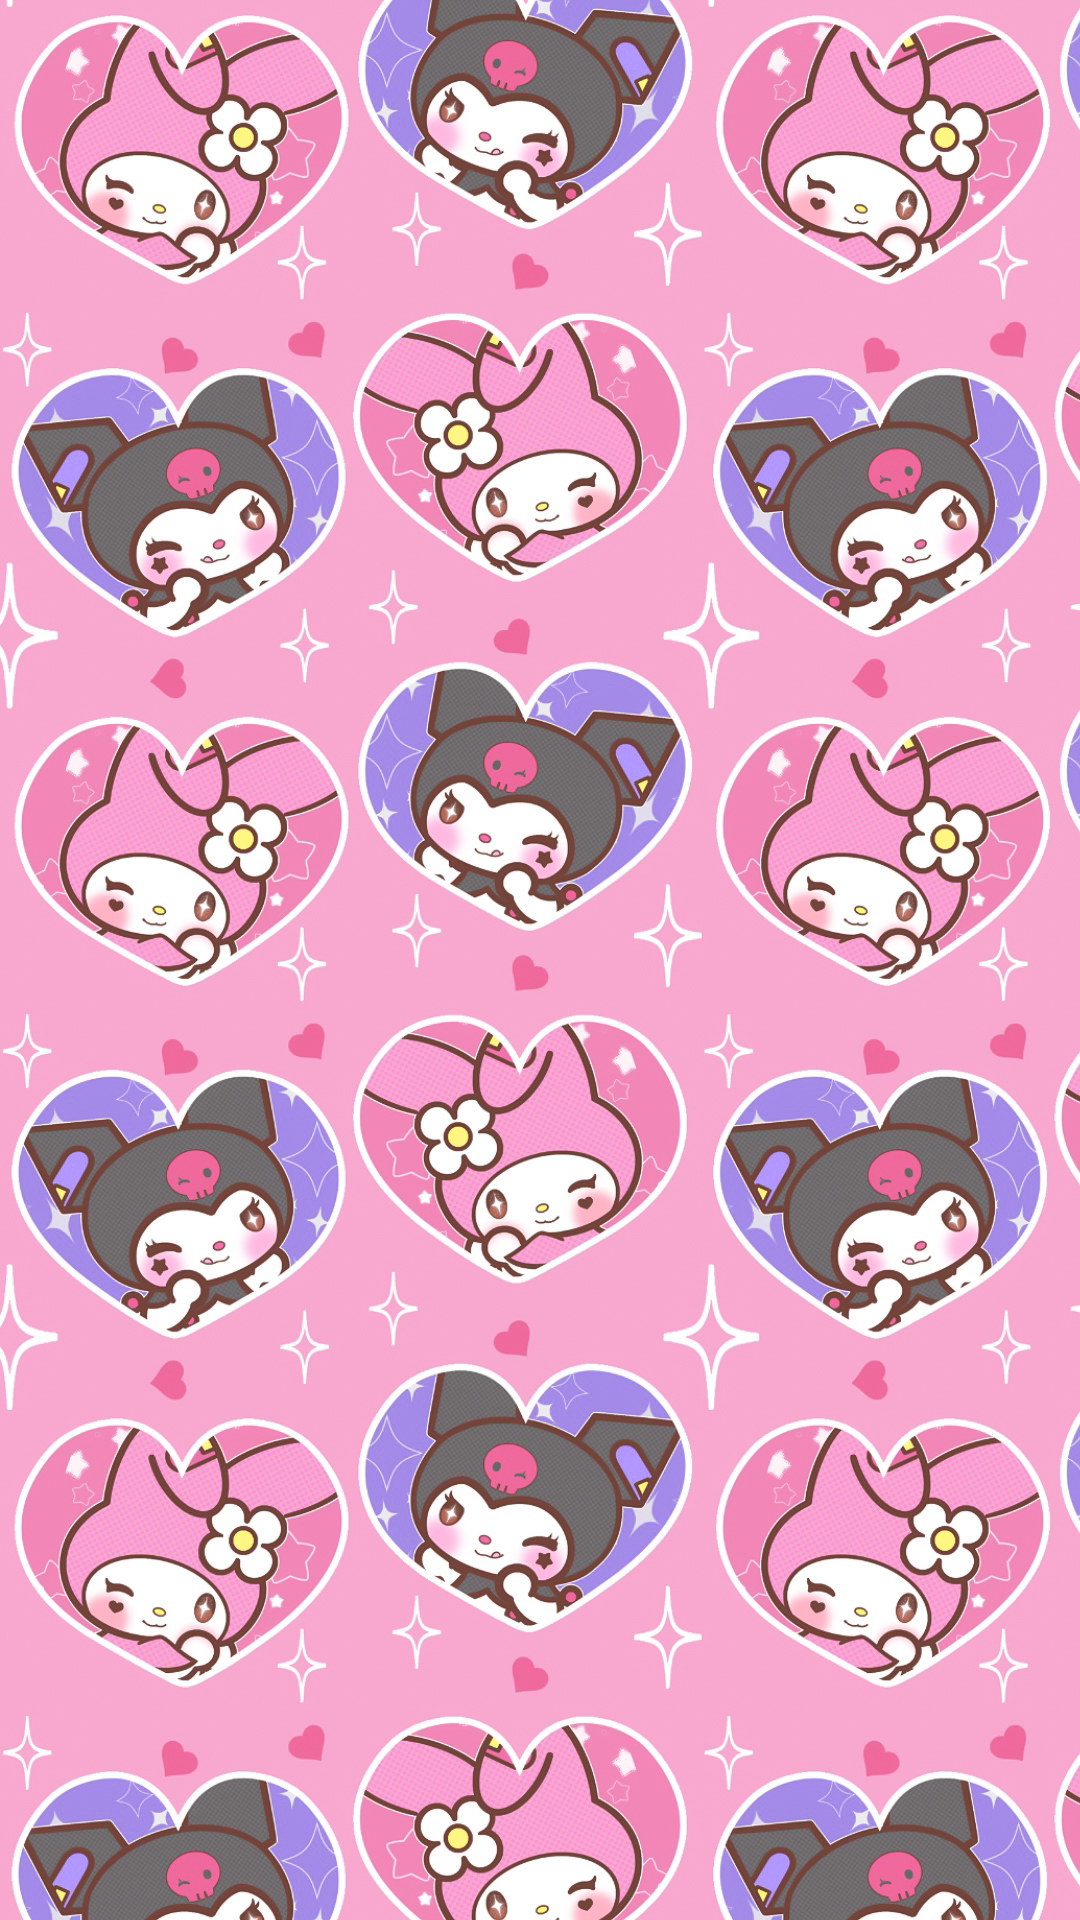 My Melody And Kuromi Wallpapers